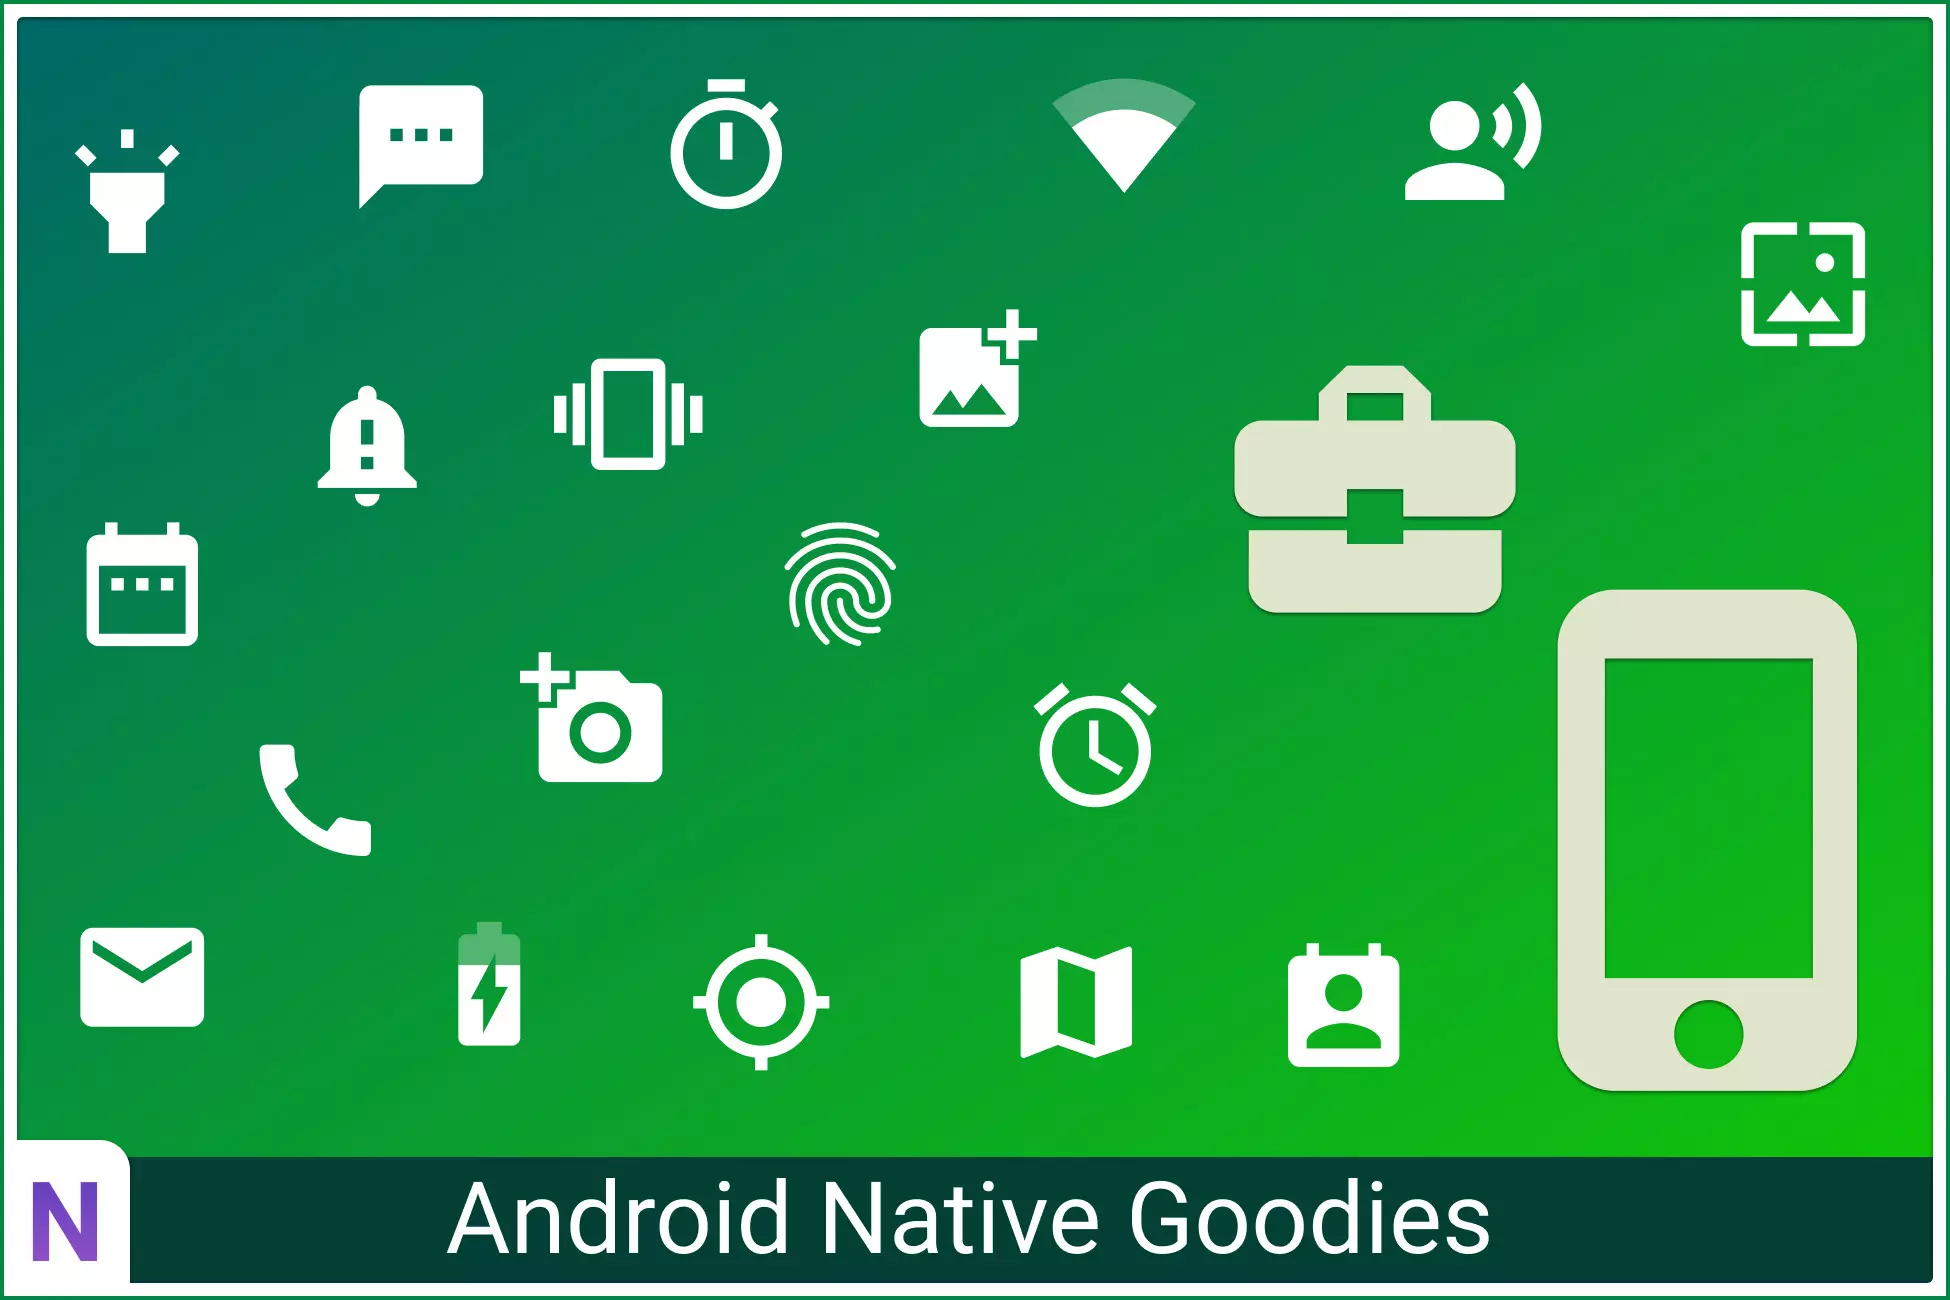 Android Native Goodies PRO